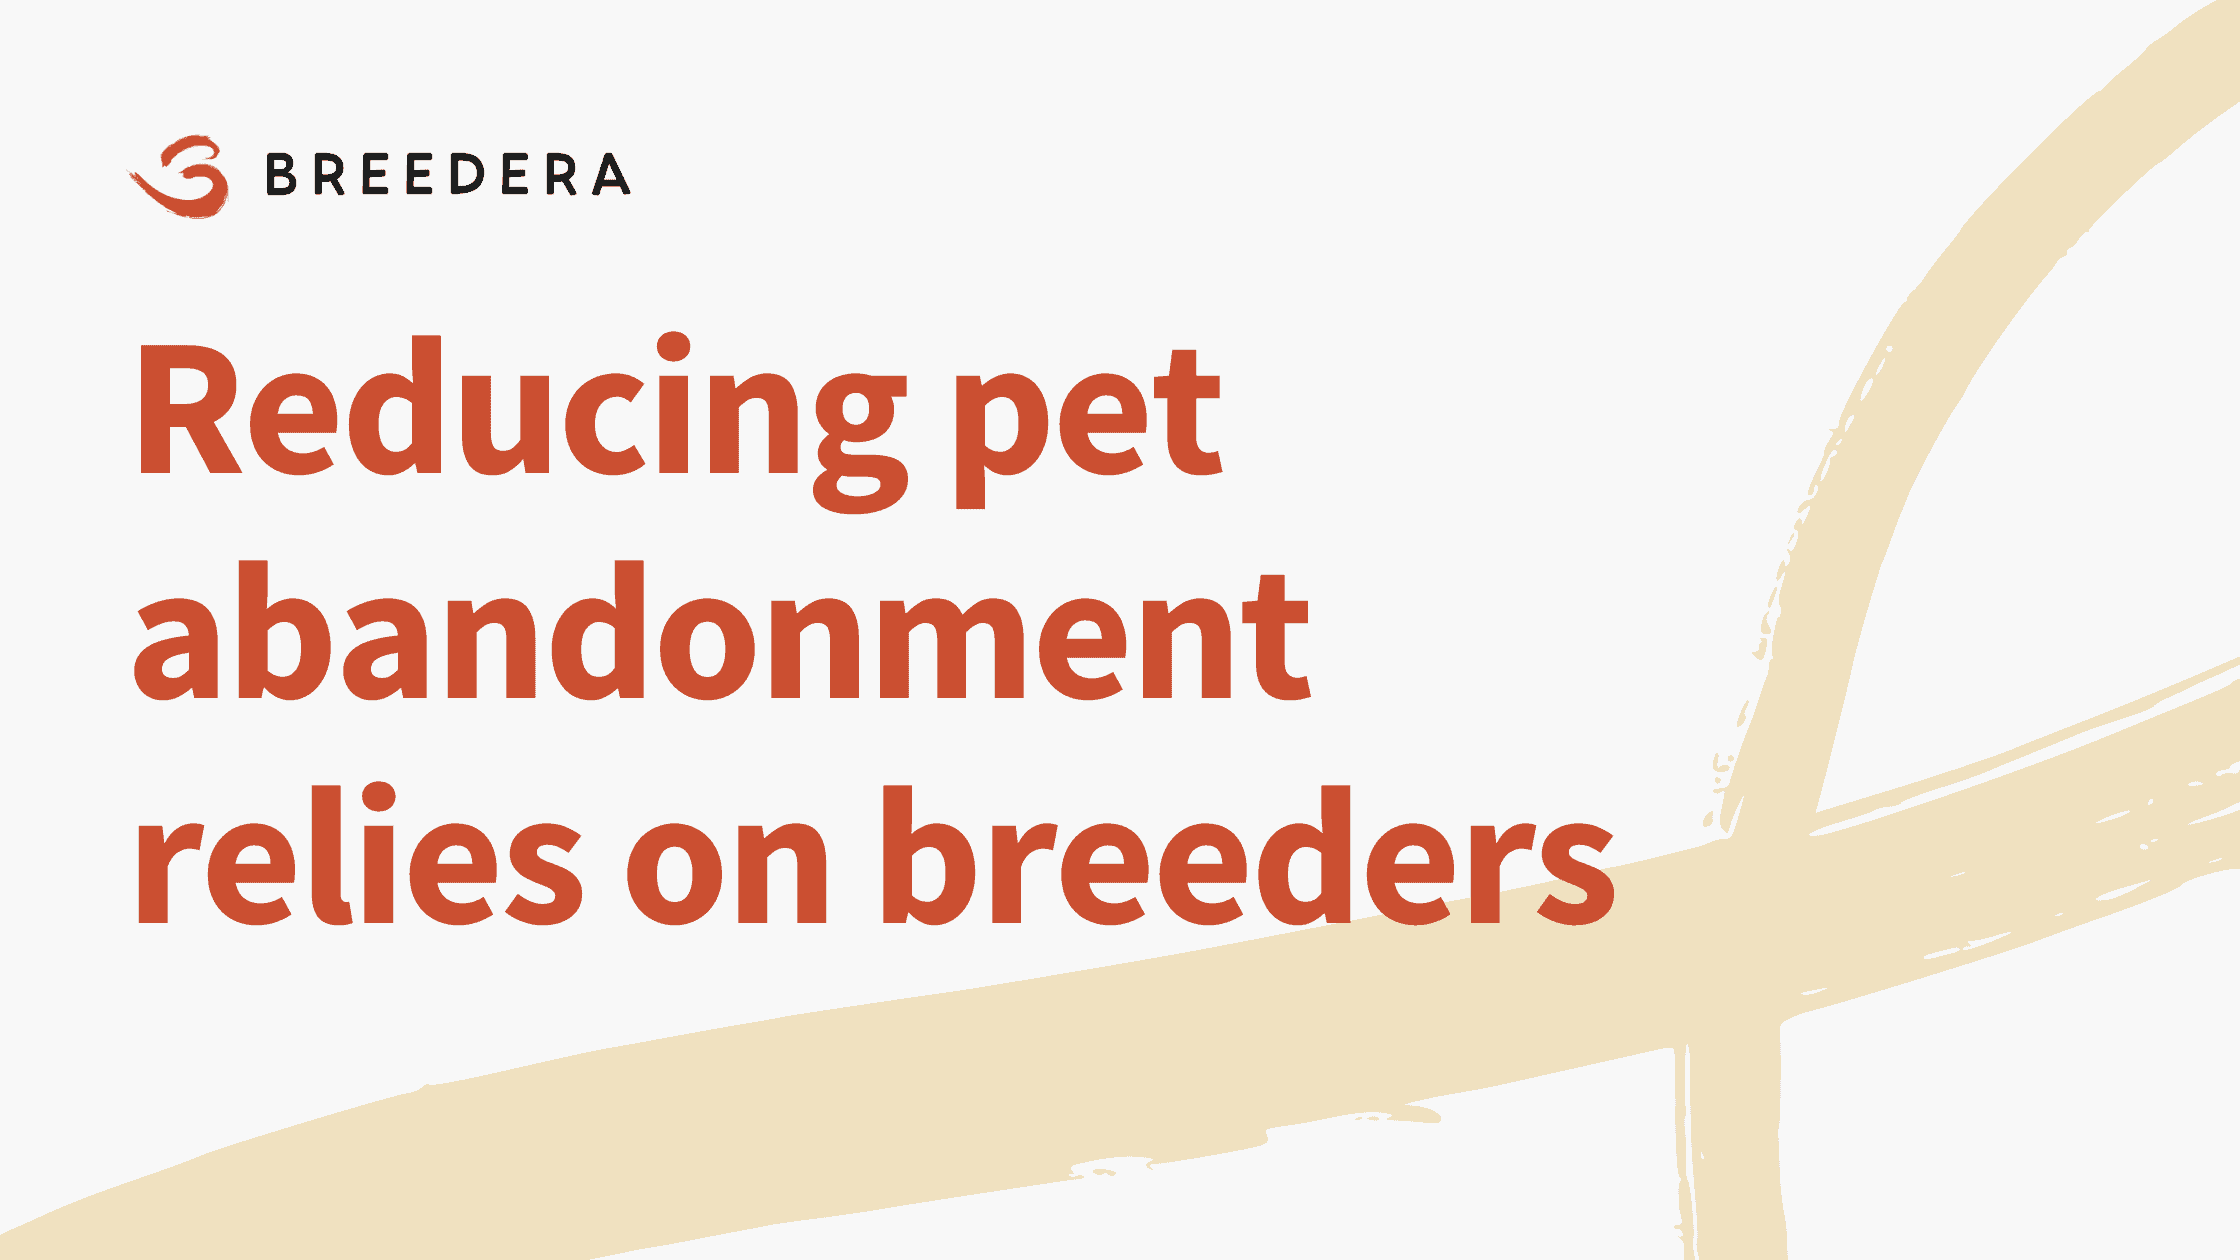 Reducing pet abandonment relies on breeders